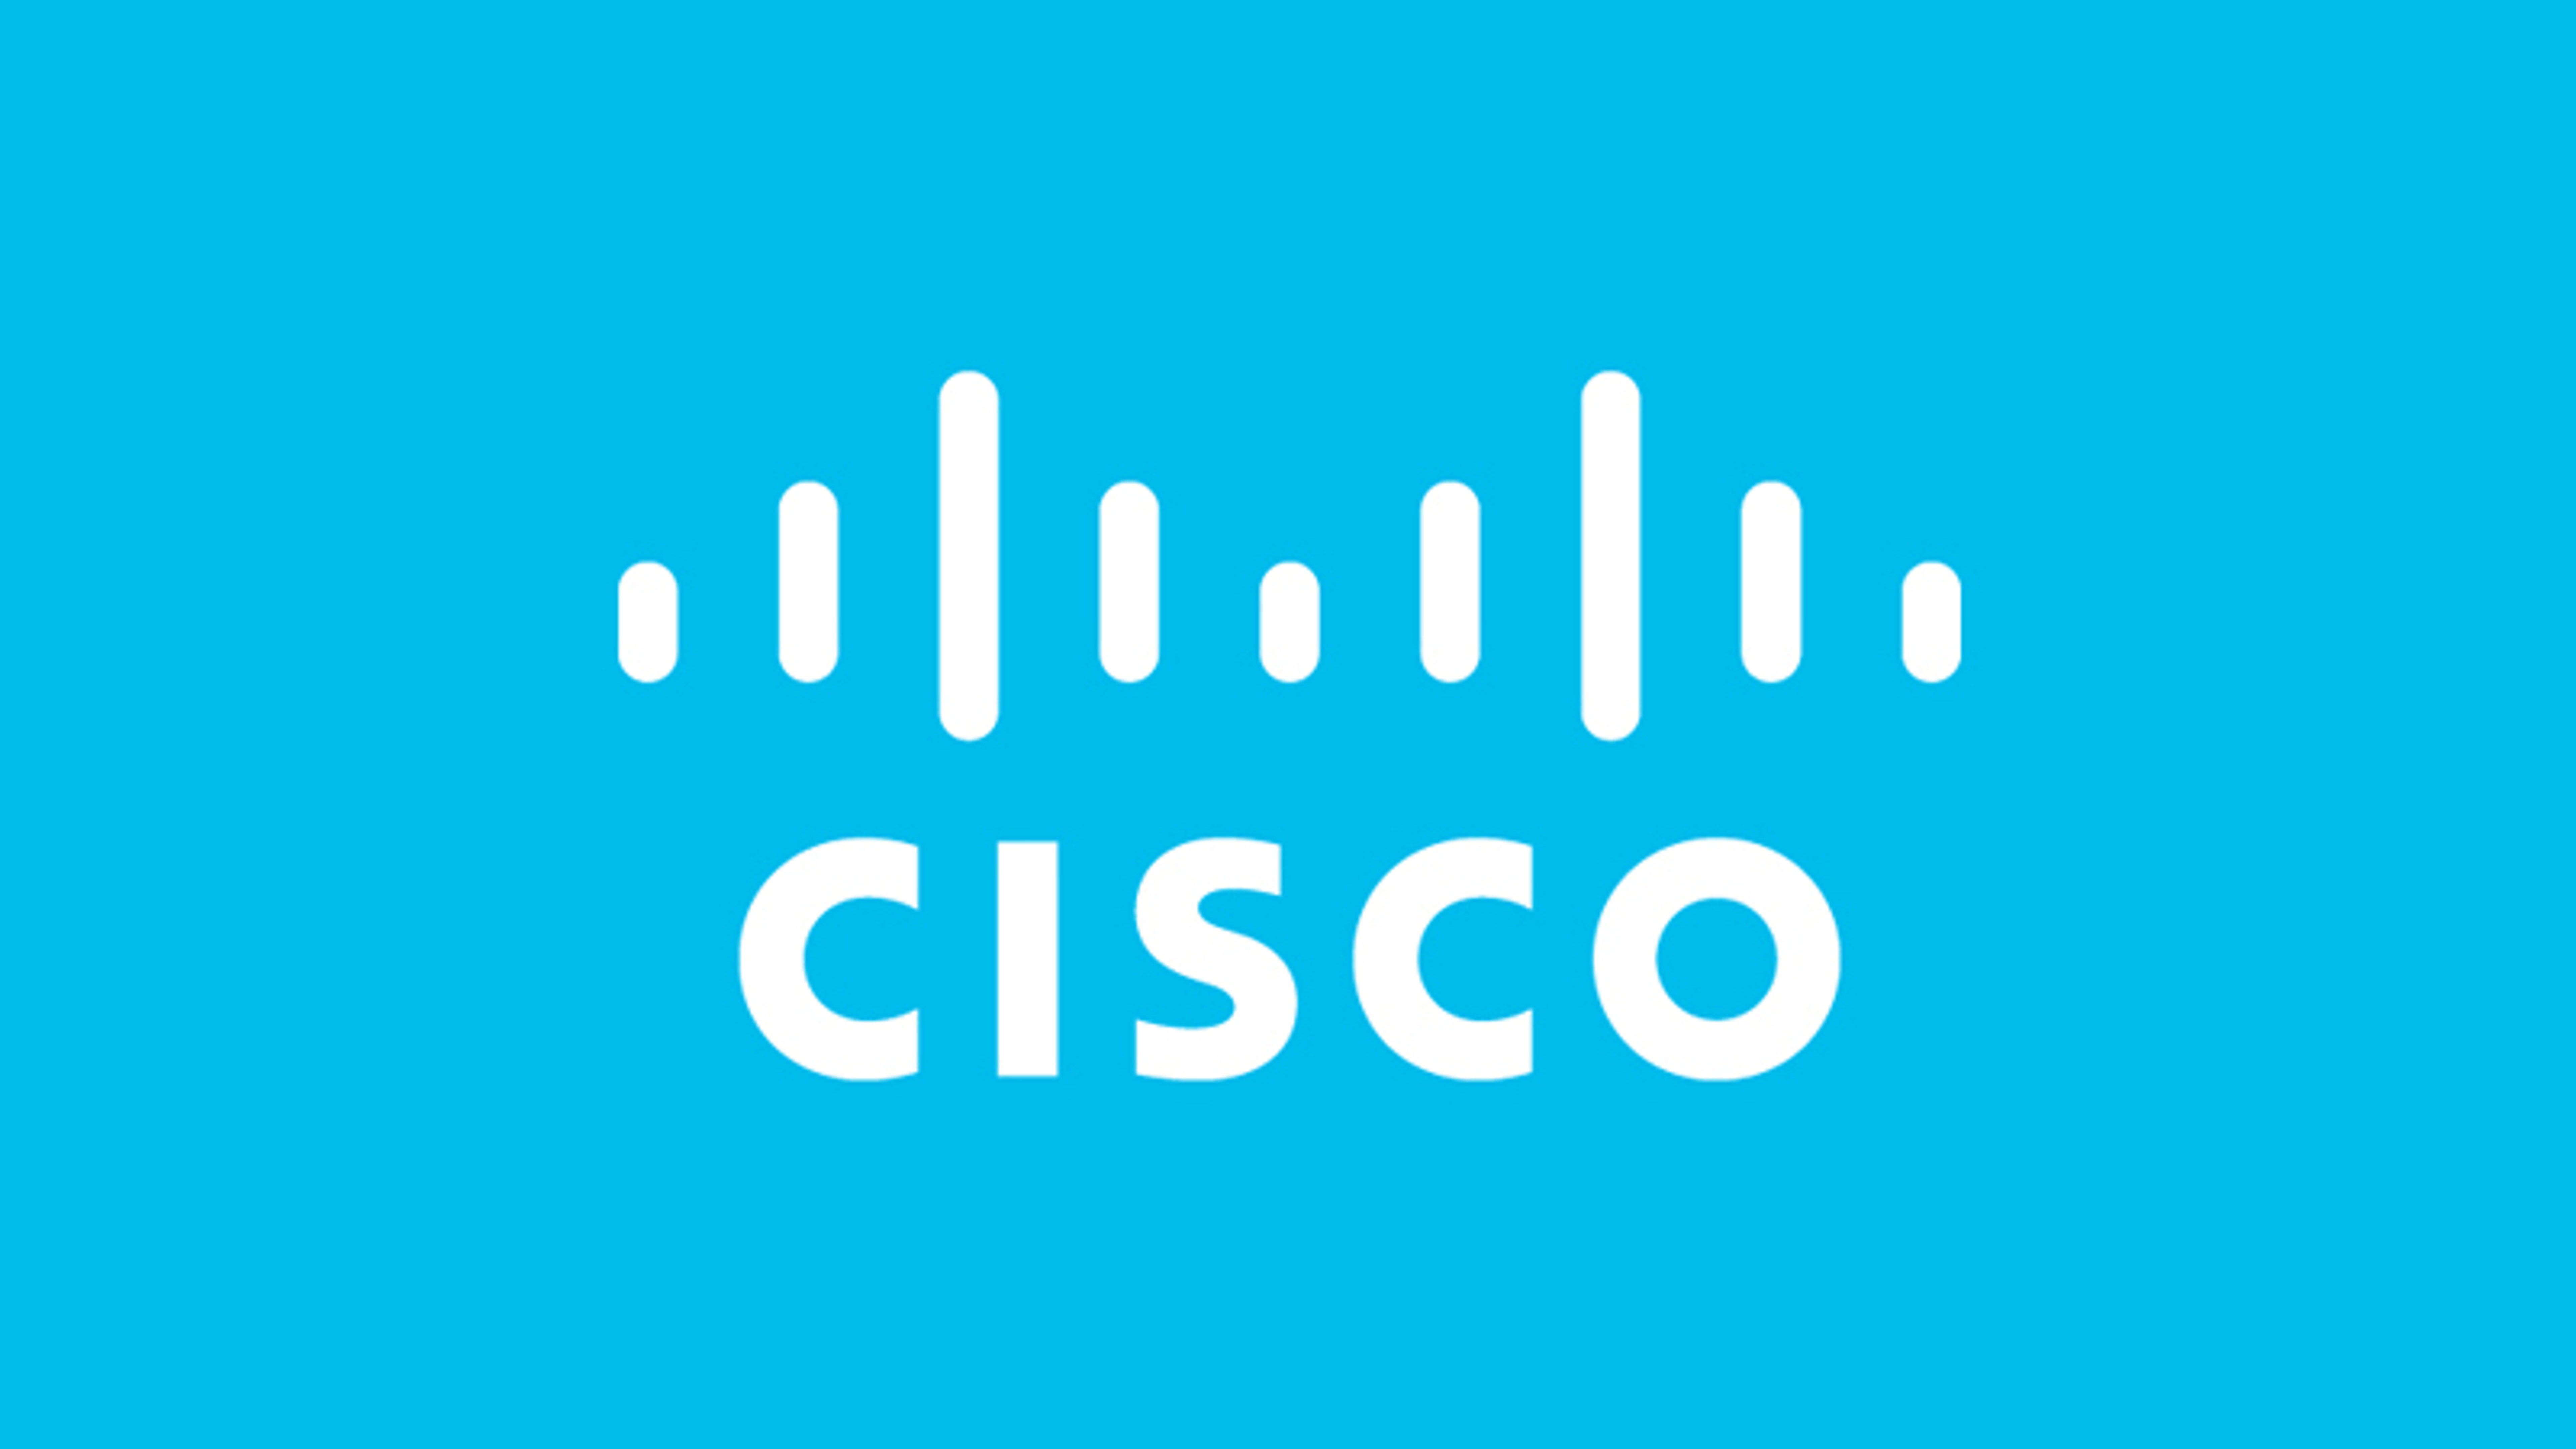 After Cisco&#39;s Q1 Report, Analysts Talk Easier Comps, Discounted Valuation, Spending Rebound